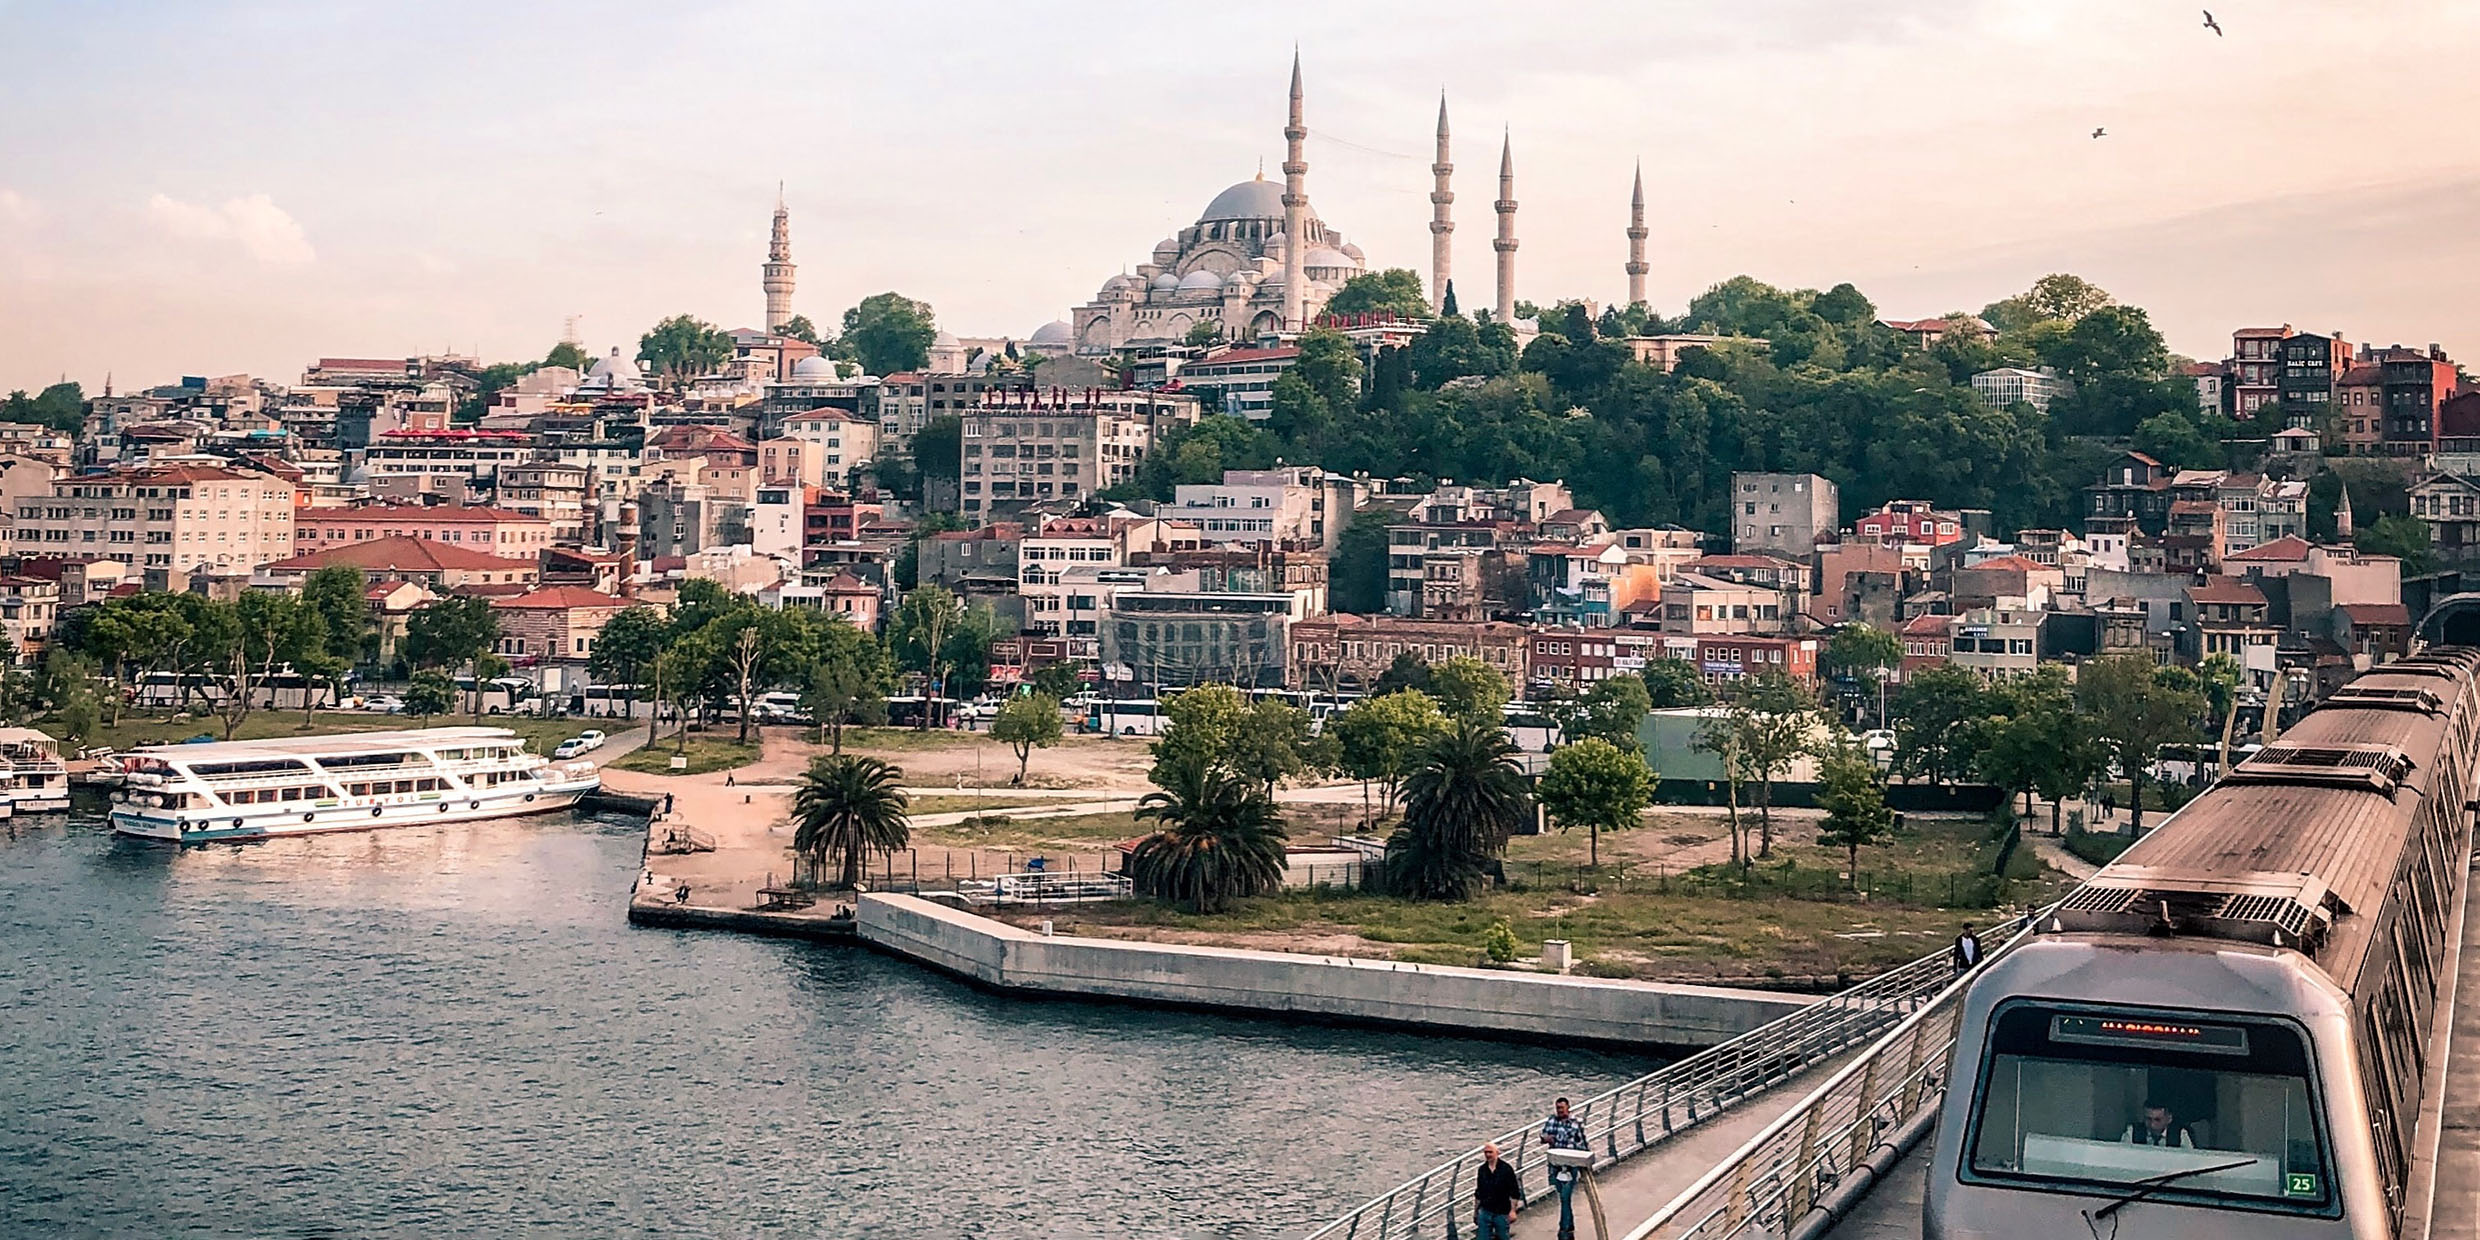 Image of the Hagia Sophia and the city of Instabul